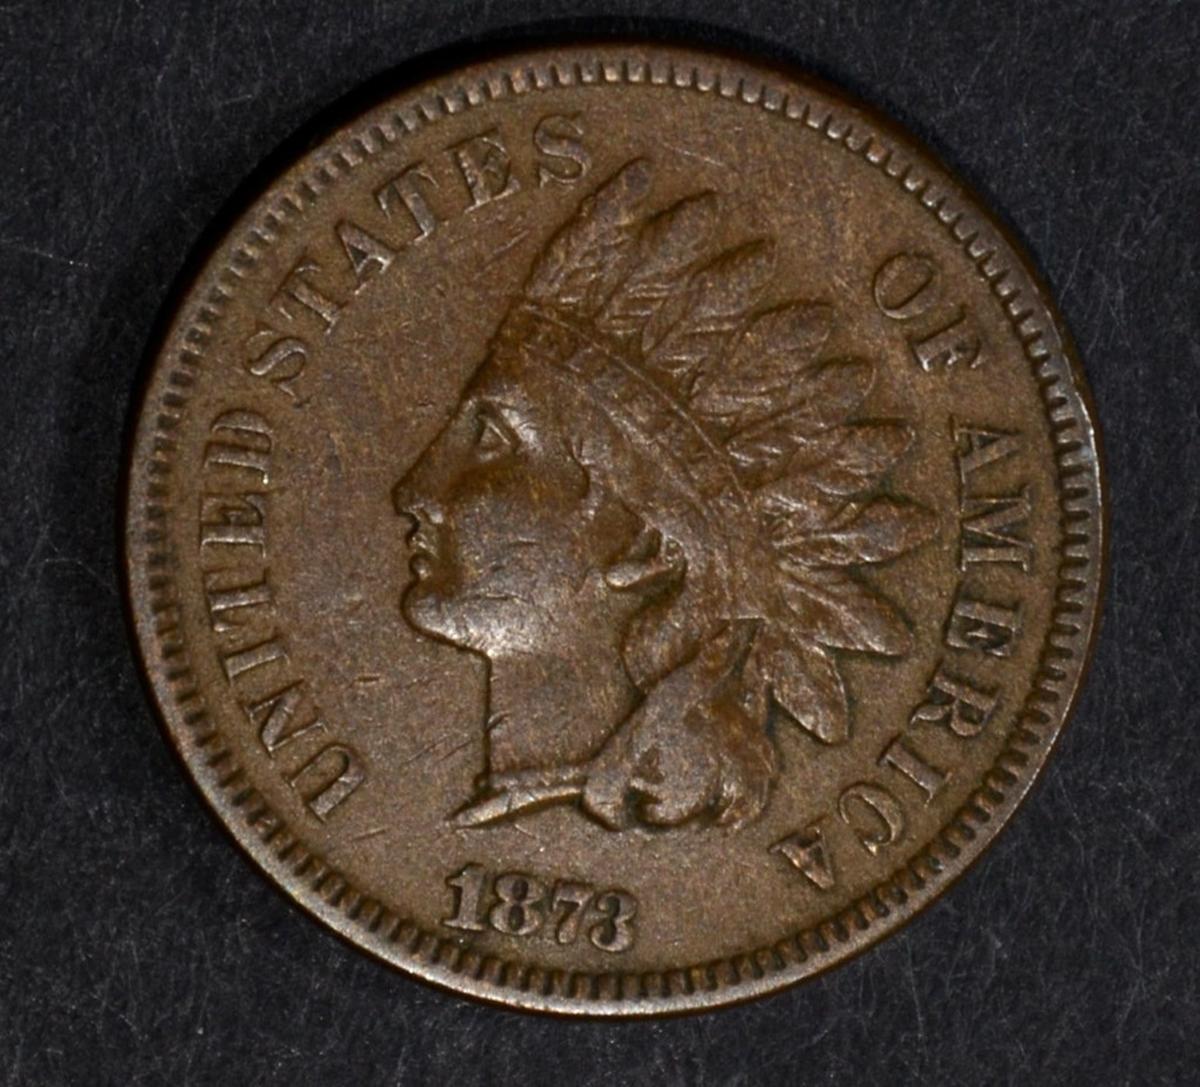 1873 “OPEN 3” INDIAN CENT, XF